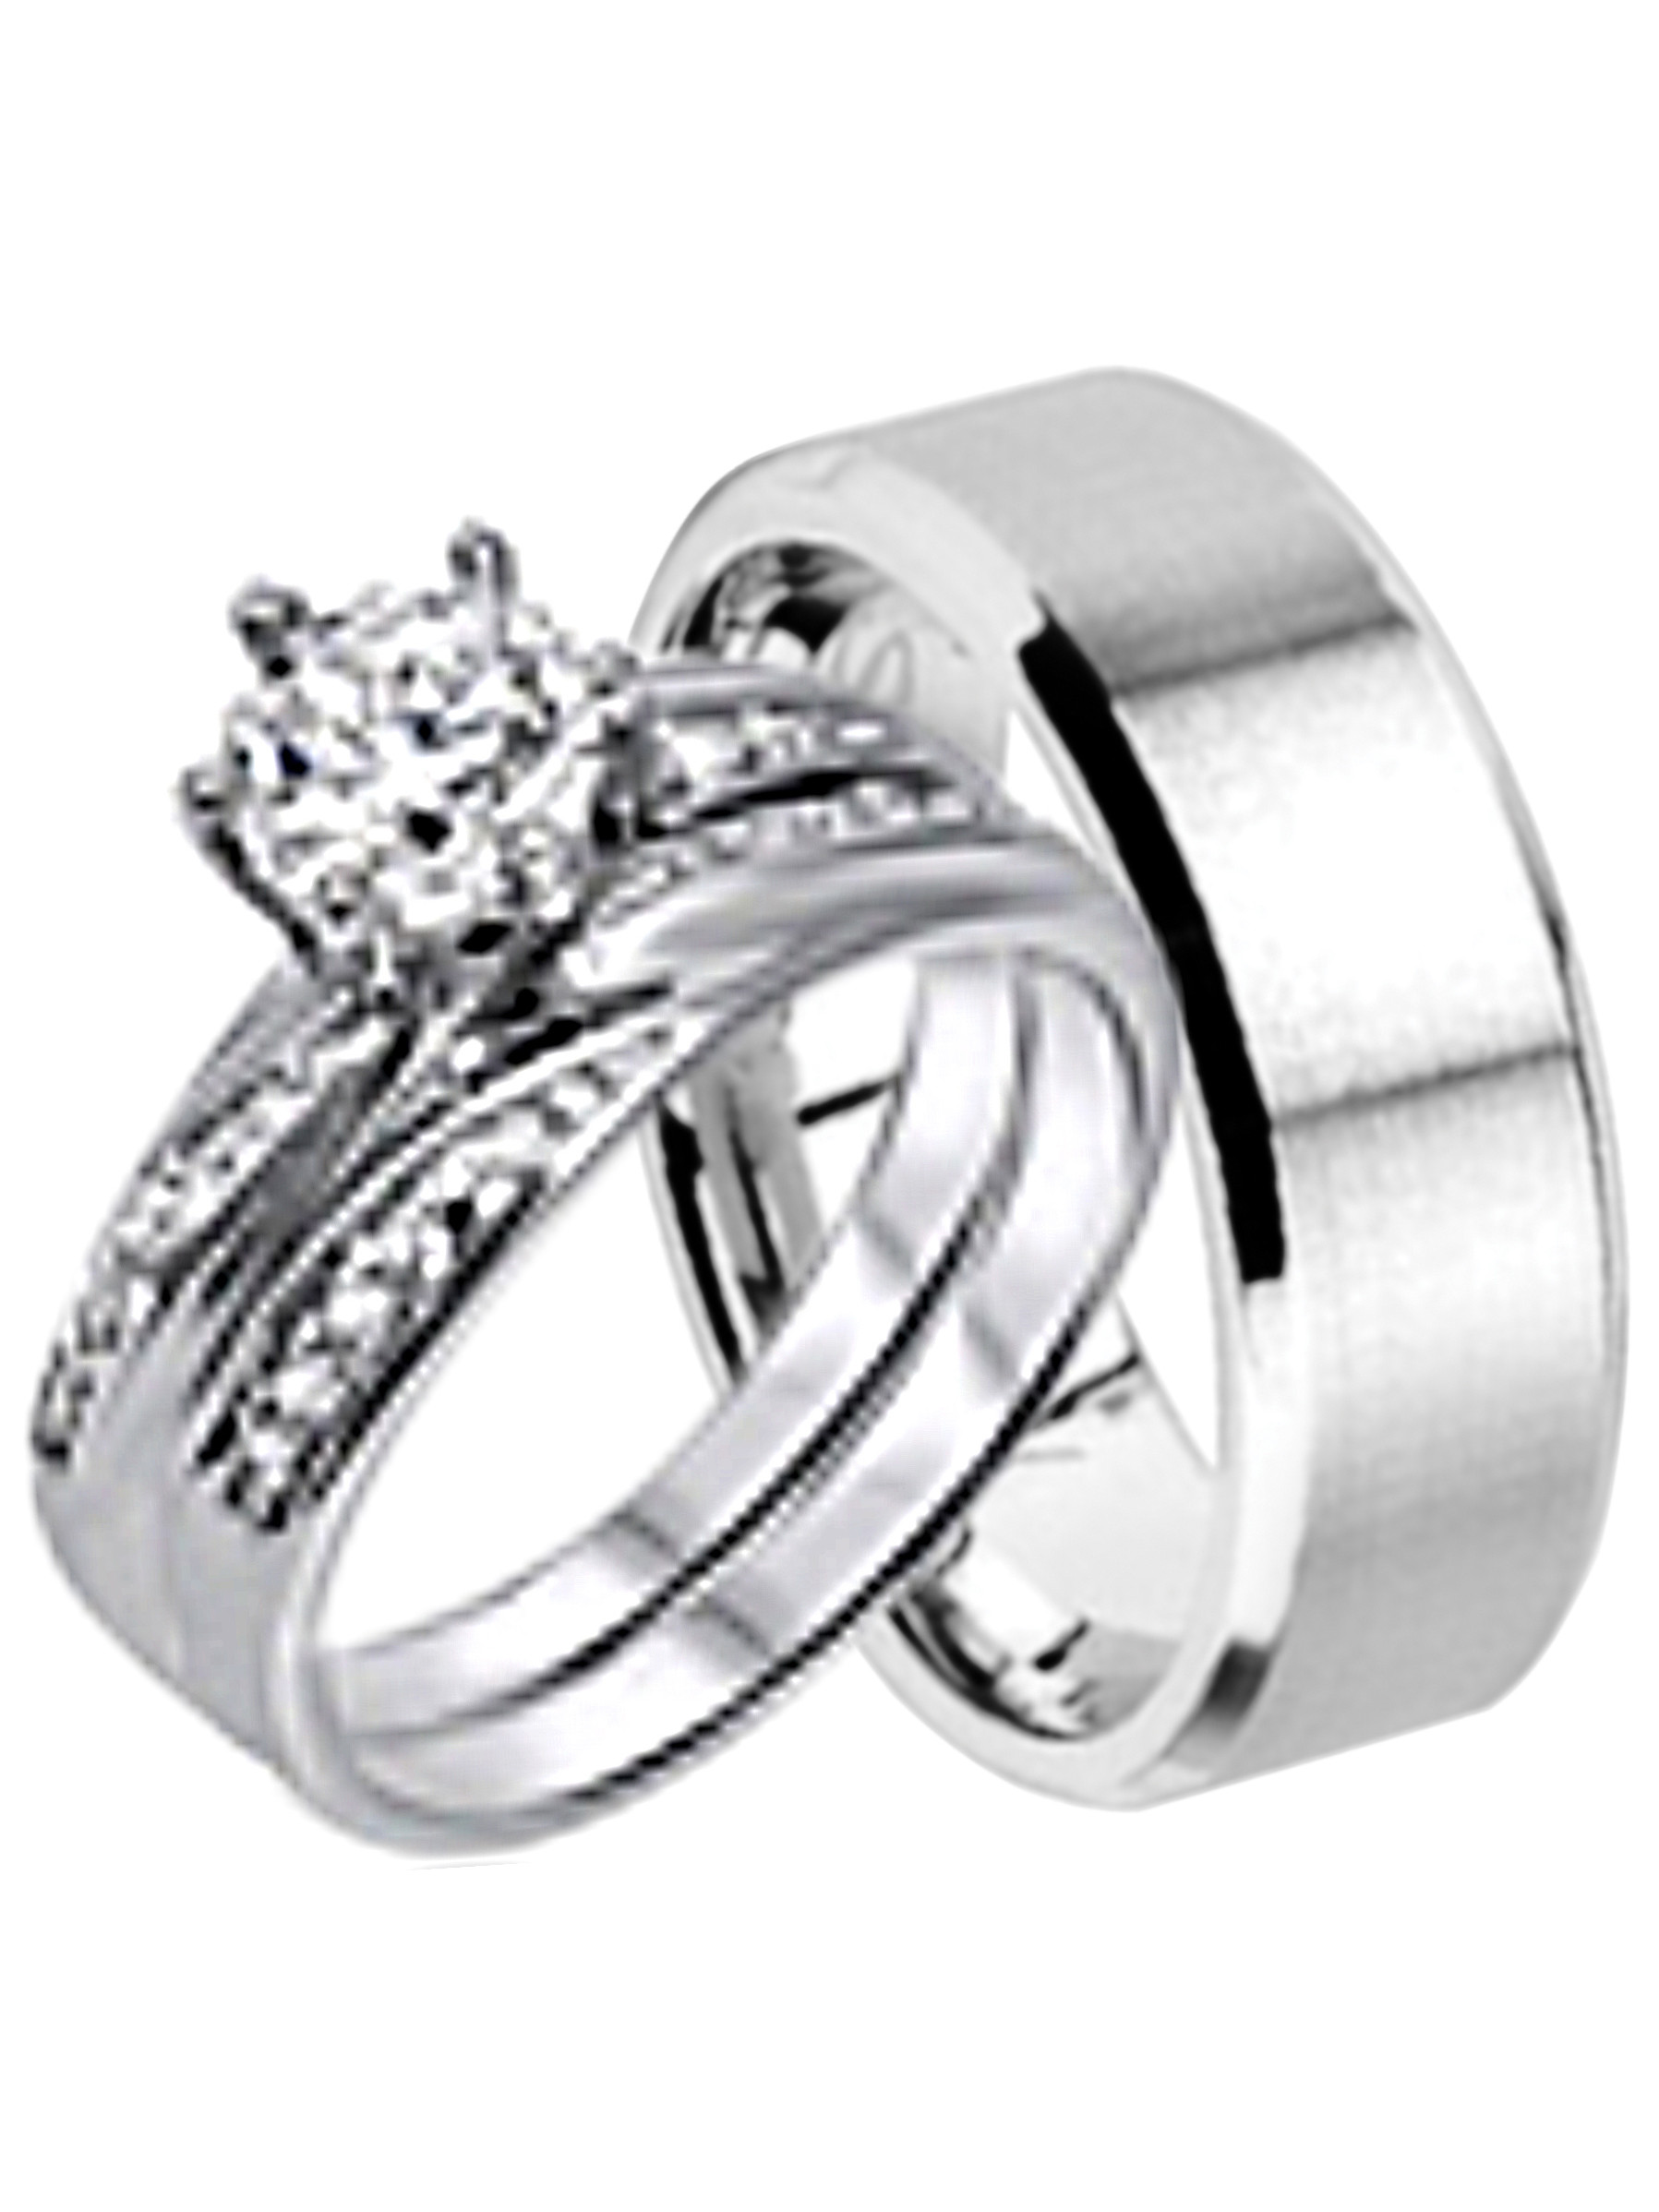 Walmart Wedding Rings For Him
 His and Hers Wedding Ring Set Matching Wedding Bands for